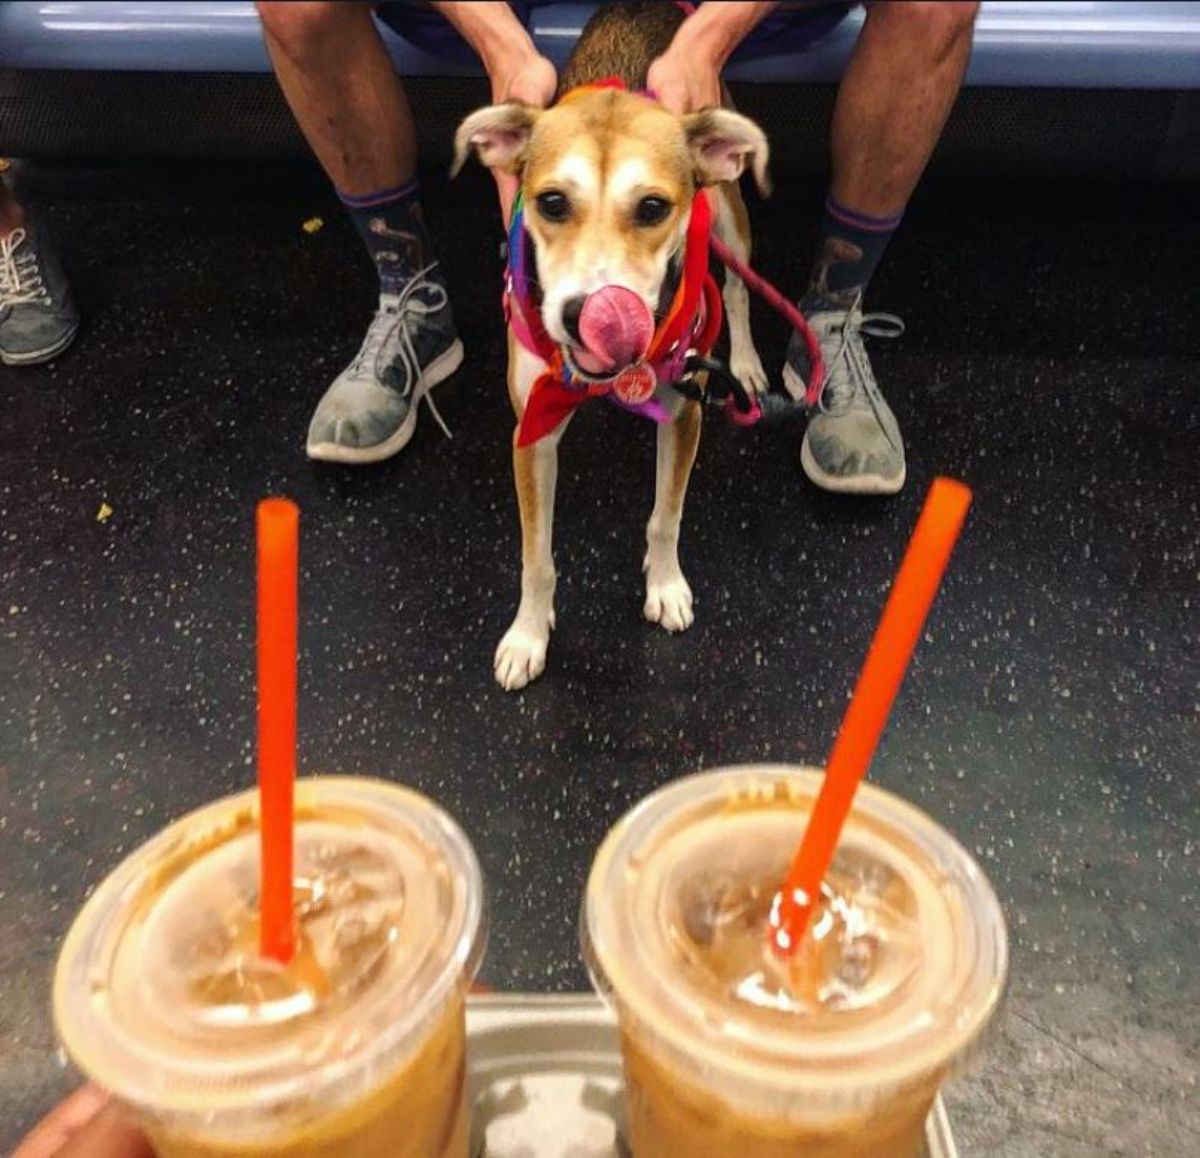 brown white and black dog on a leash sitting on a train floor being held by a man with someone holding 2 coffees close to the camera